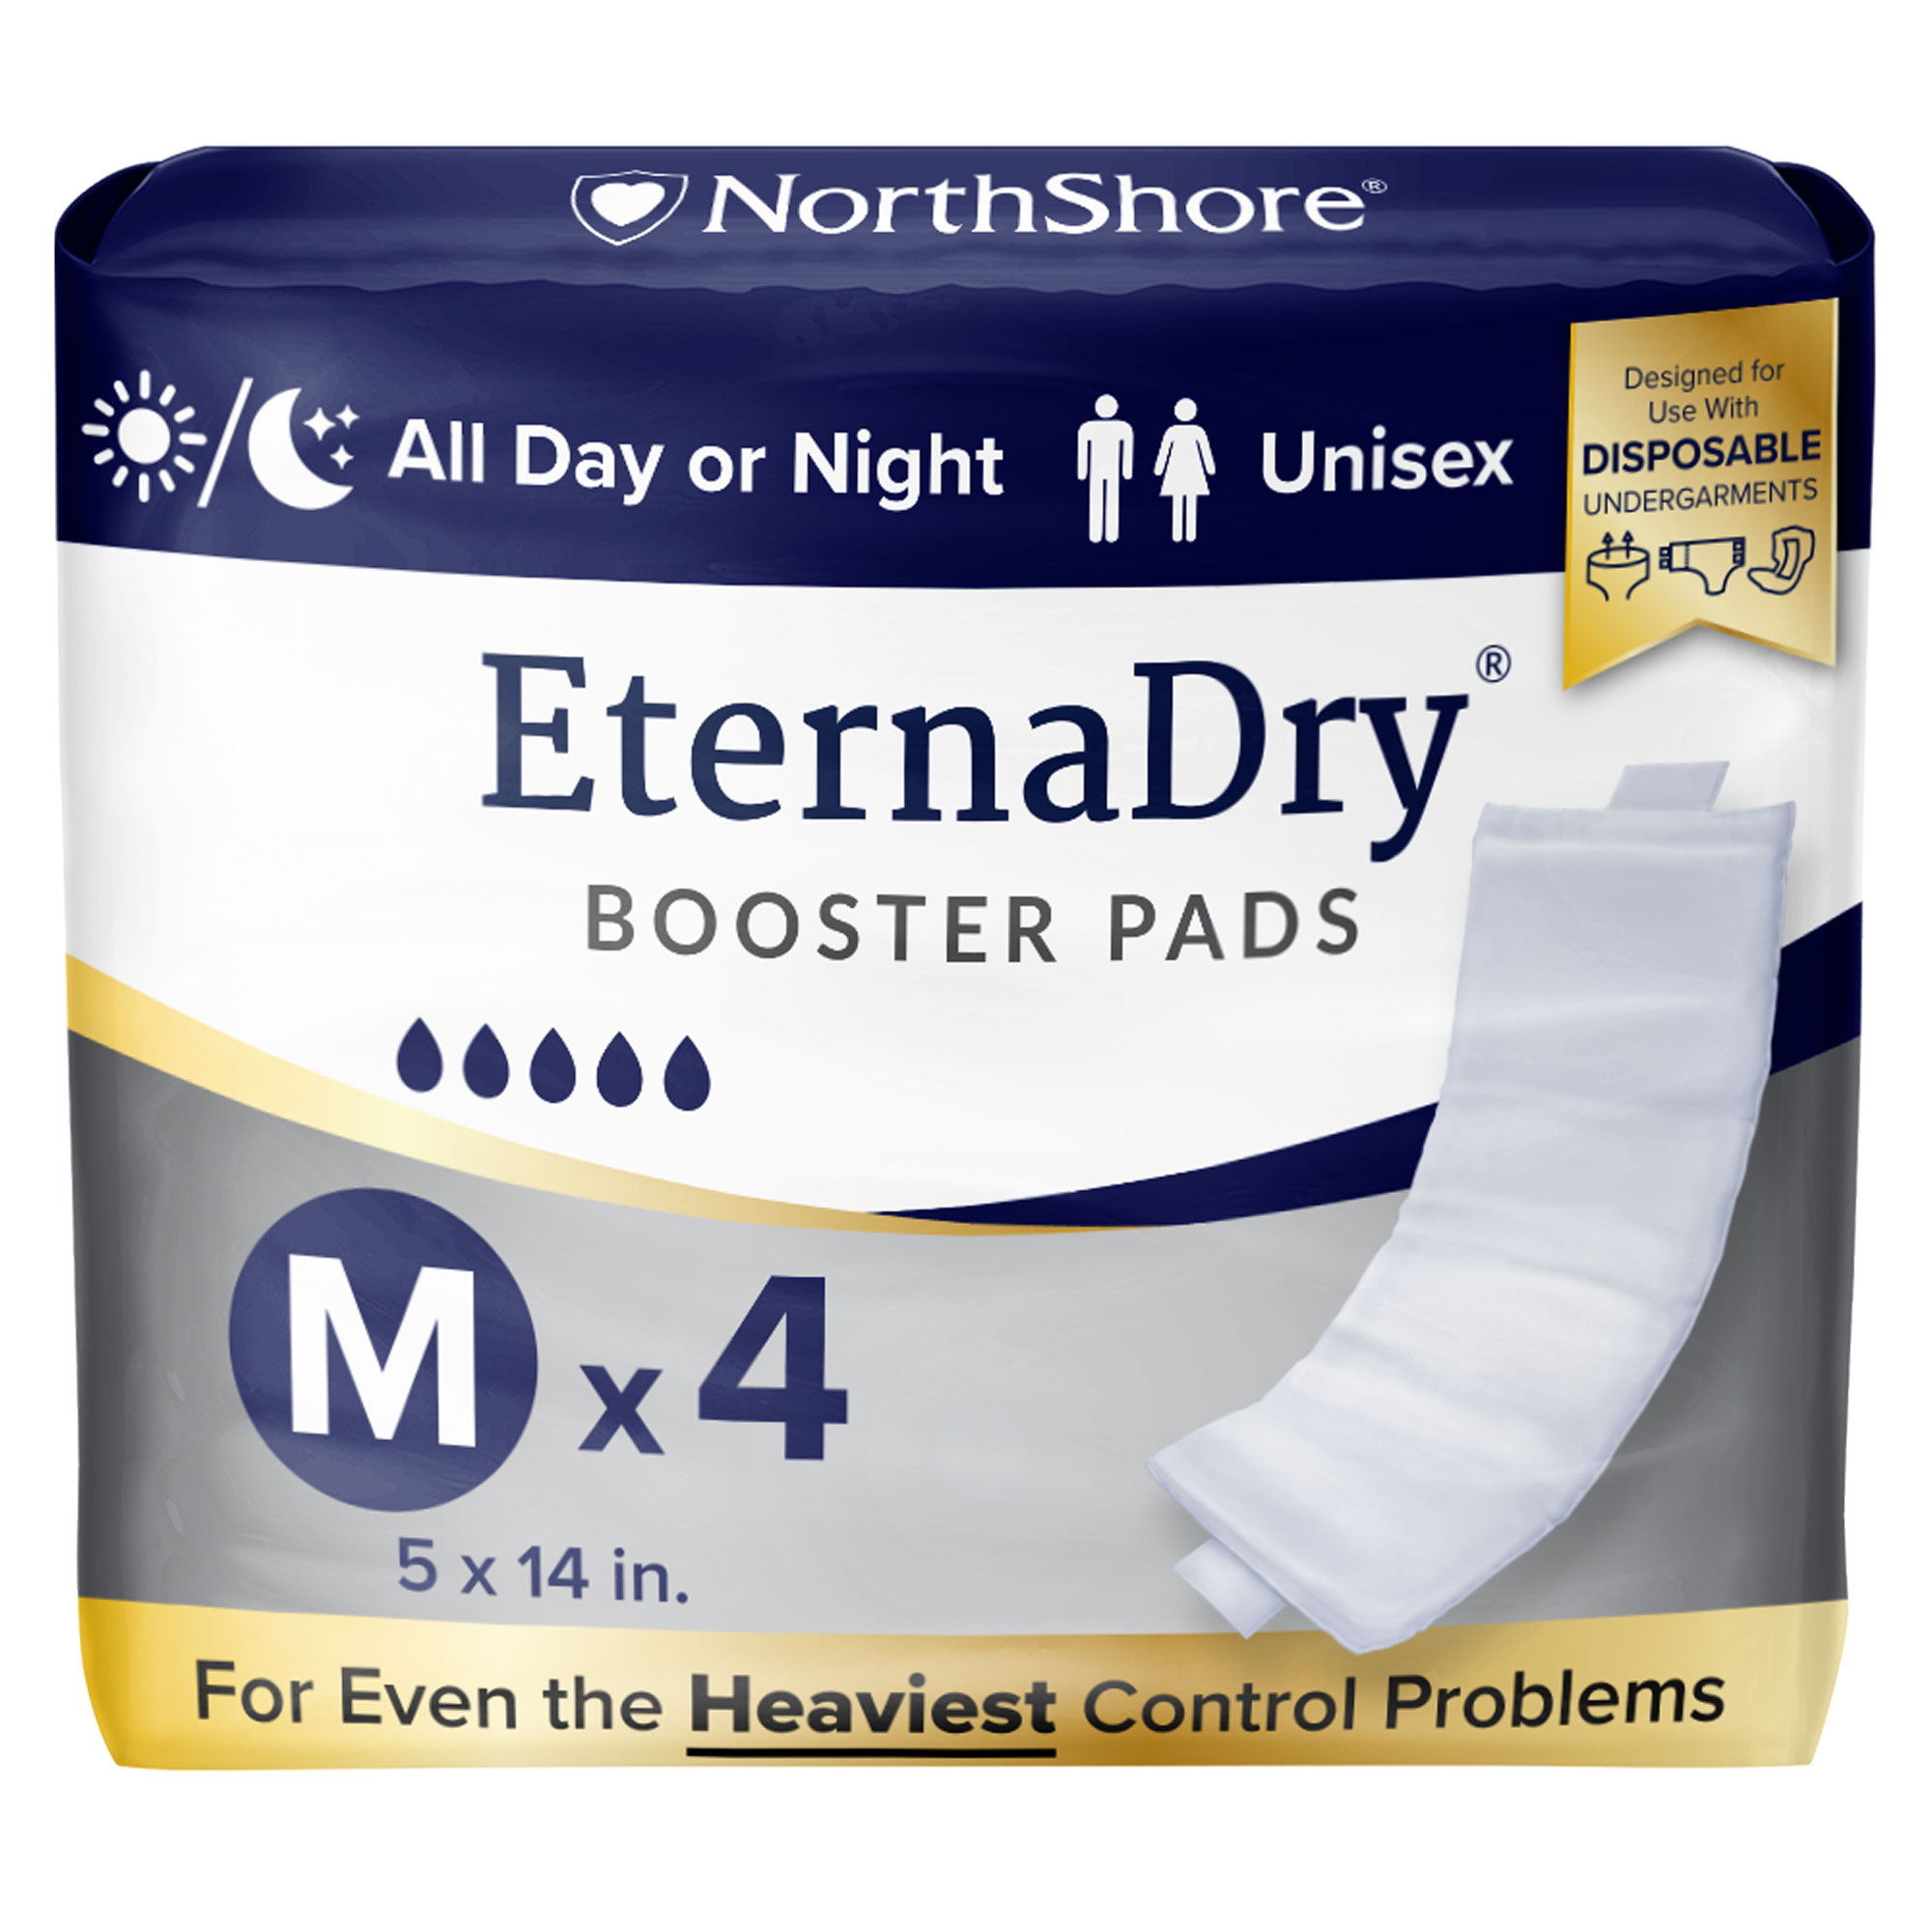 NorthShore Booster Pad Diaper Inserts with Adhesive Strip